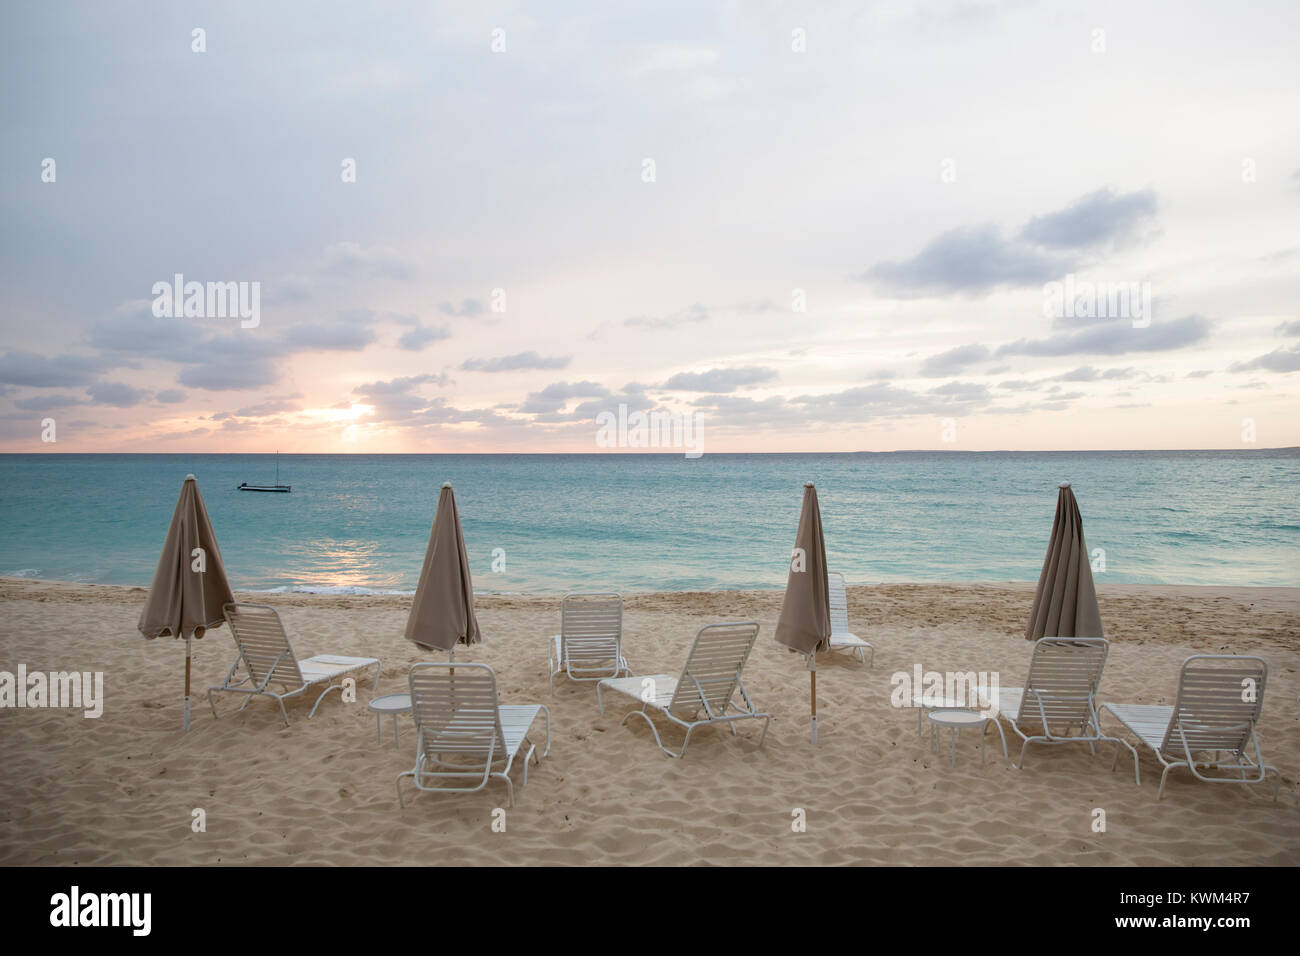 Scenic view of parasols and lounge chairs at beach against cloudy sky Stock Photo